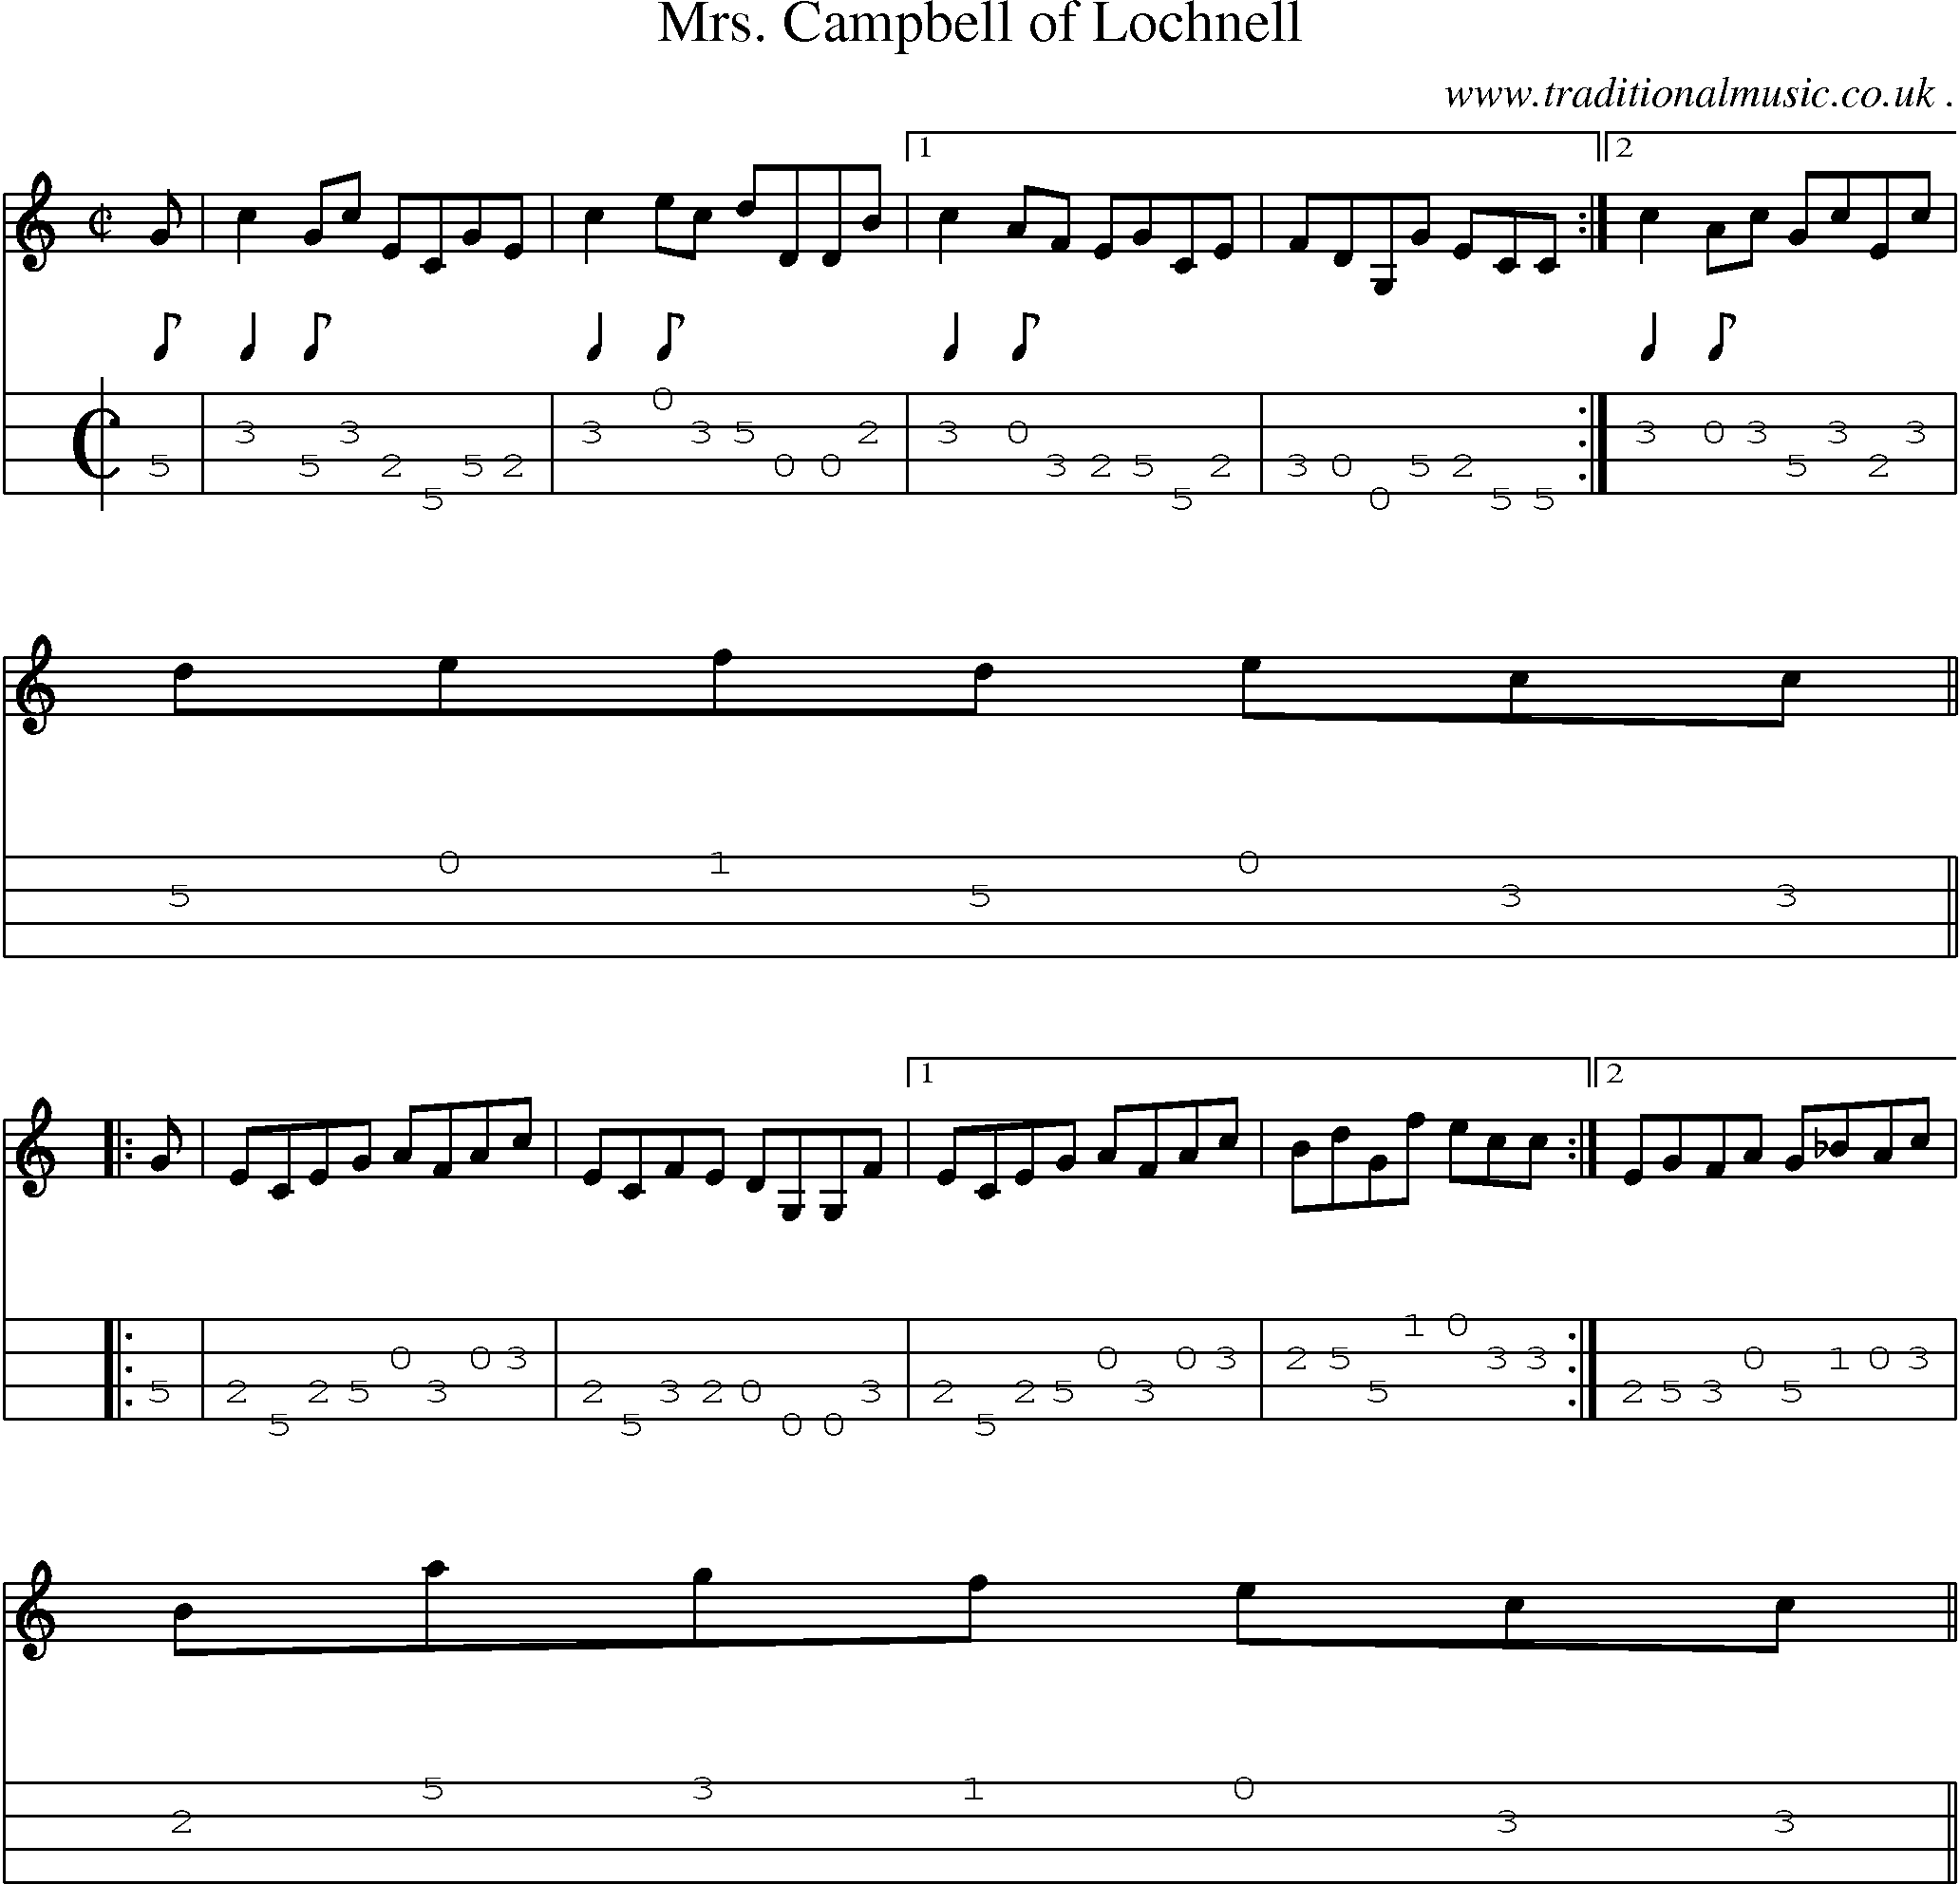 Sheet-music  score, Chords and Mandolin Tabs for Mrs Campbell Of Lochnell